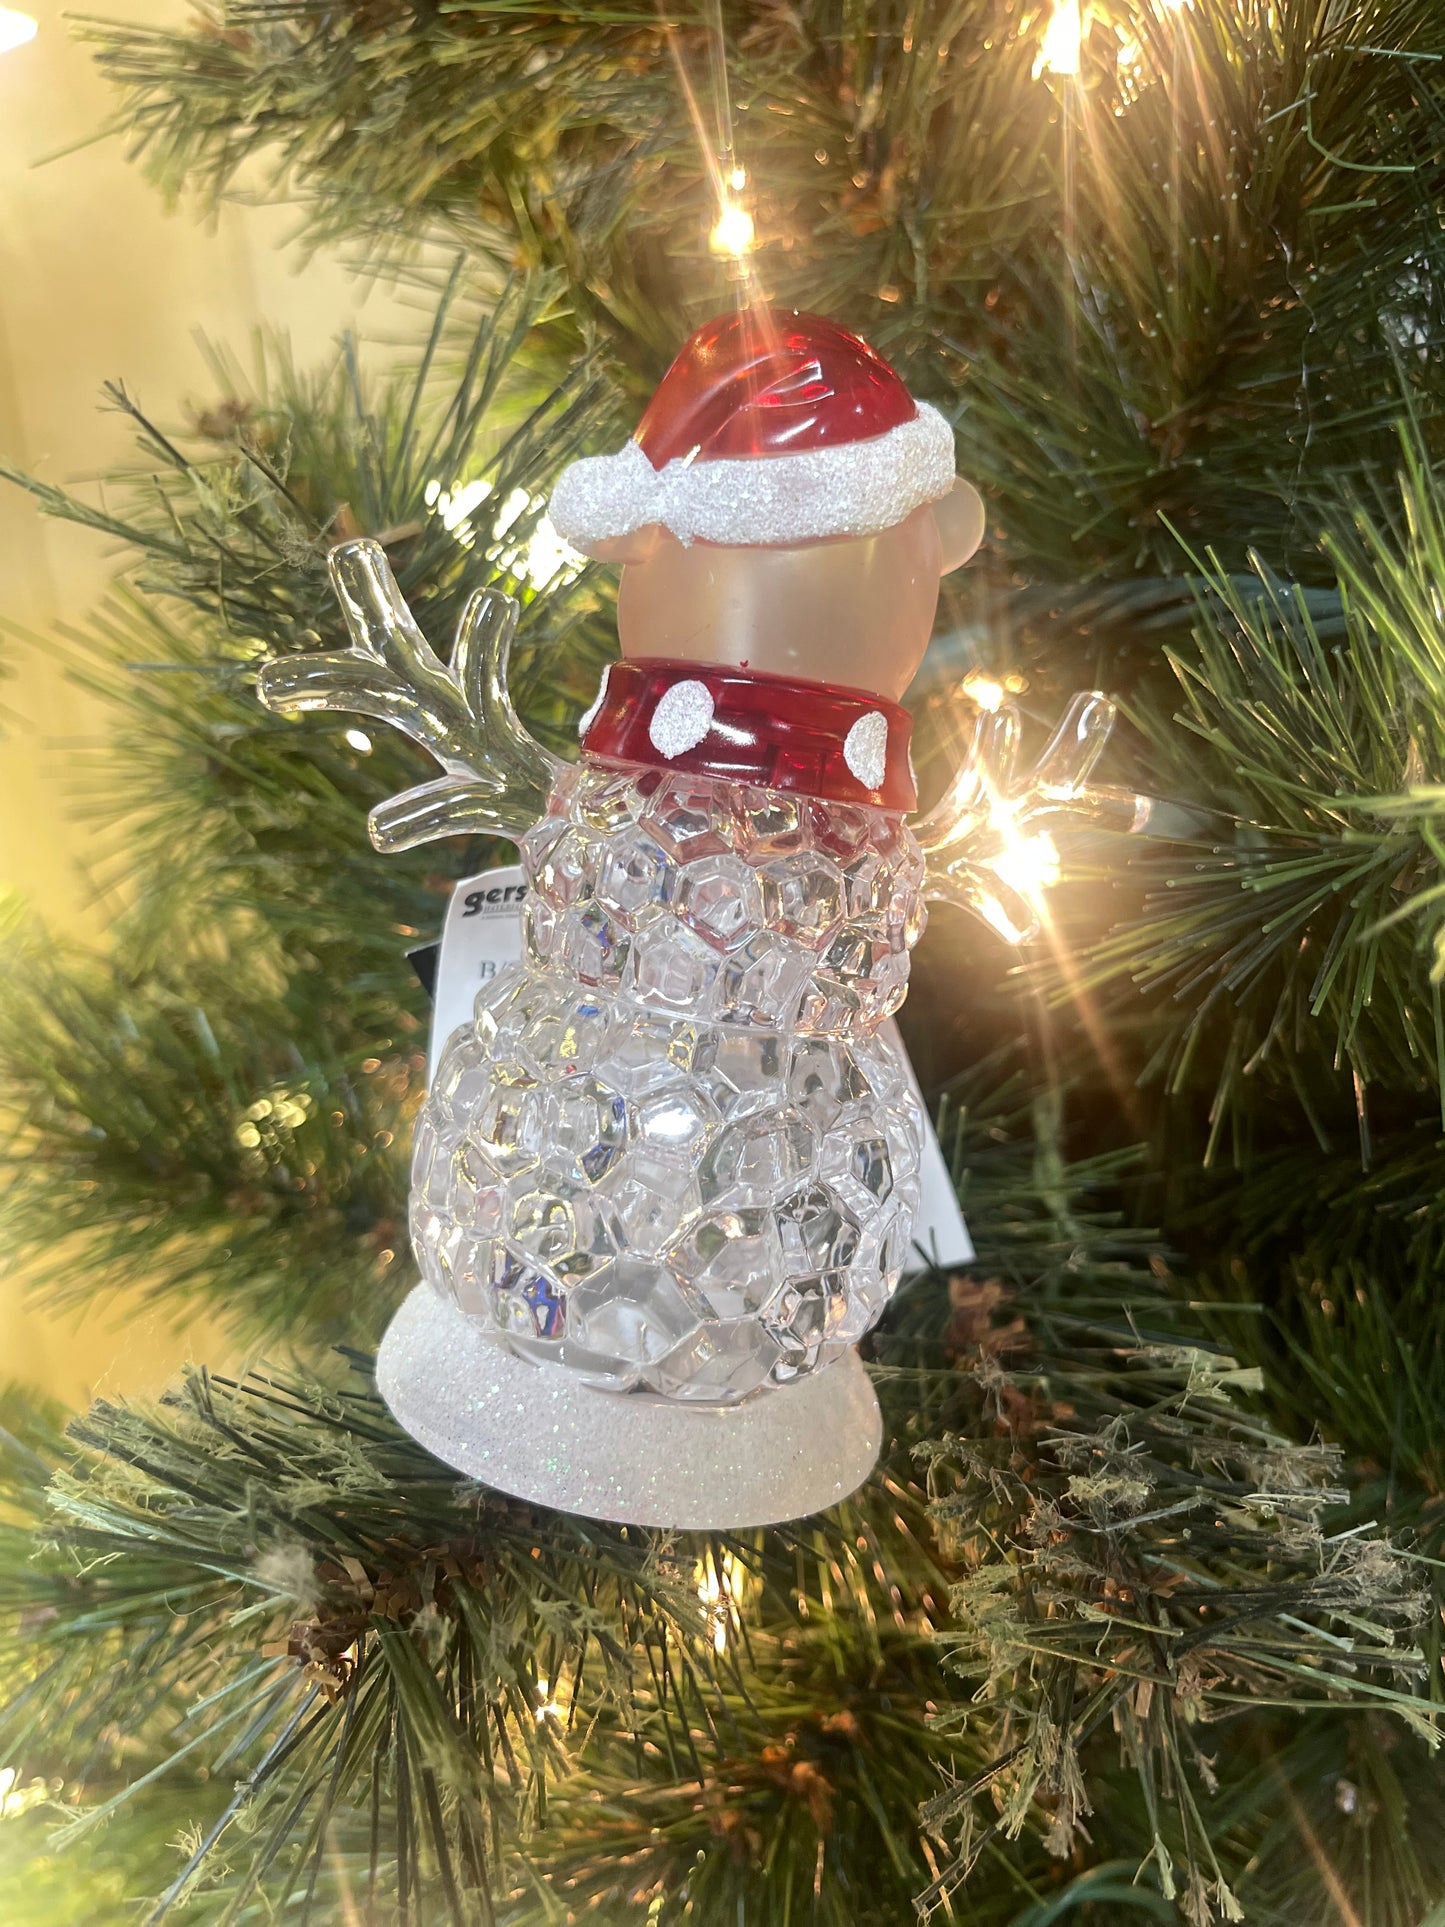 Lighted Acrylic Holiday Character Snowman 4 Styles